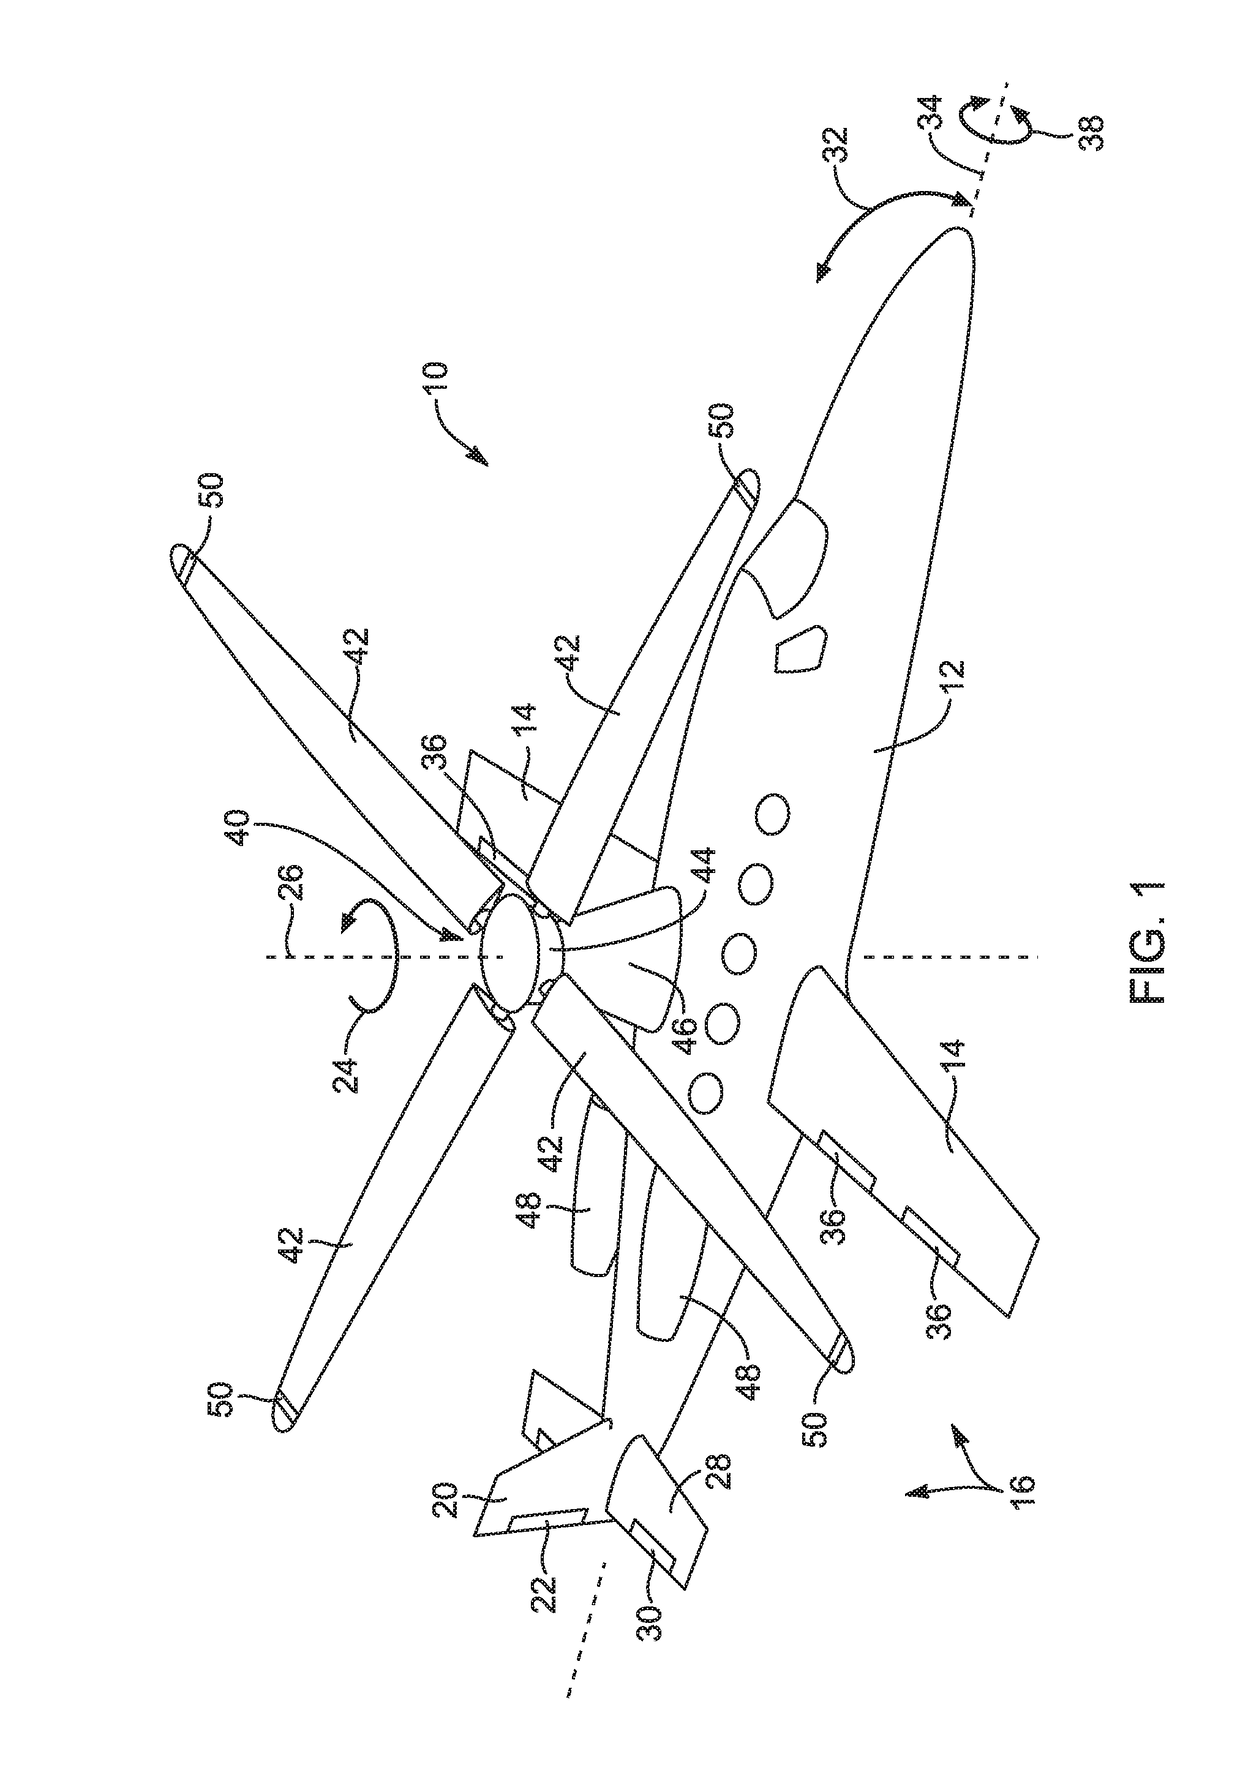 Apparatus And Method For Roll Moment Equalization At High Advance Ratios For Rotary Wing Aircraft